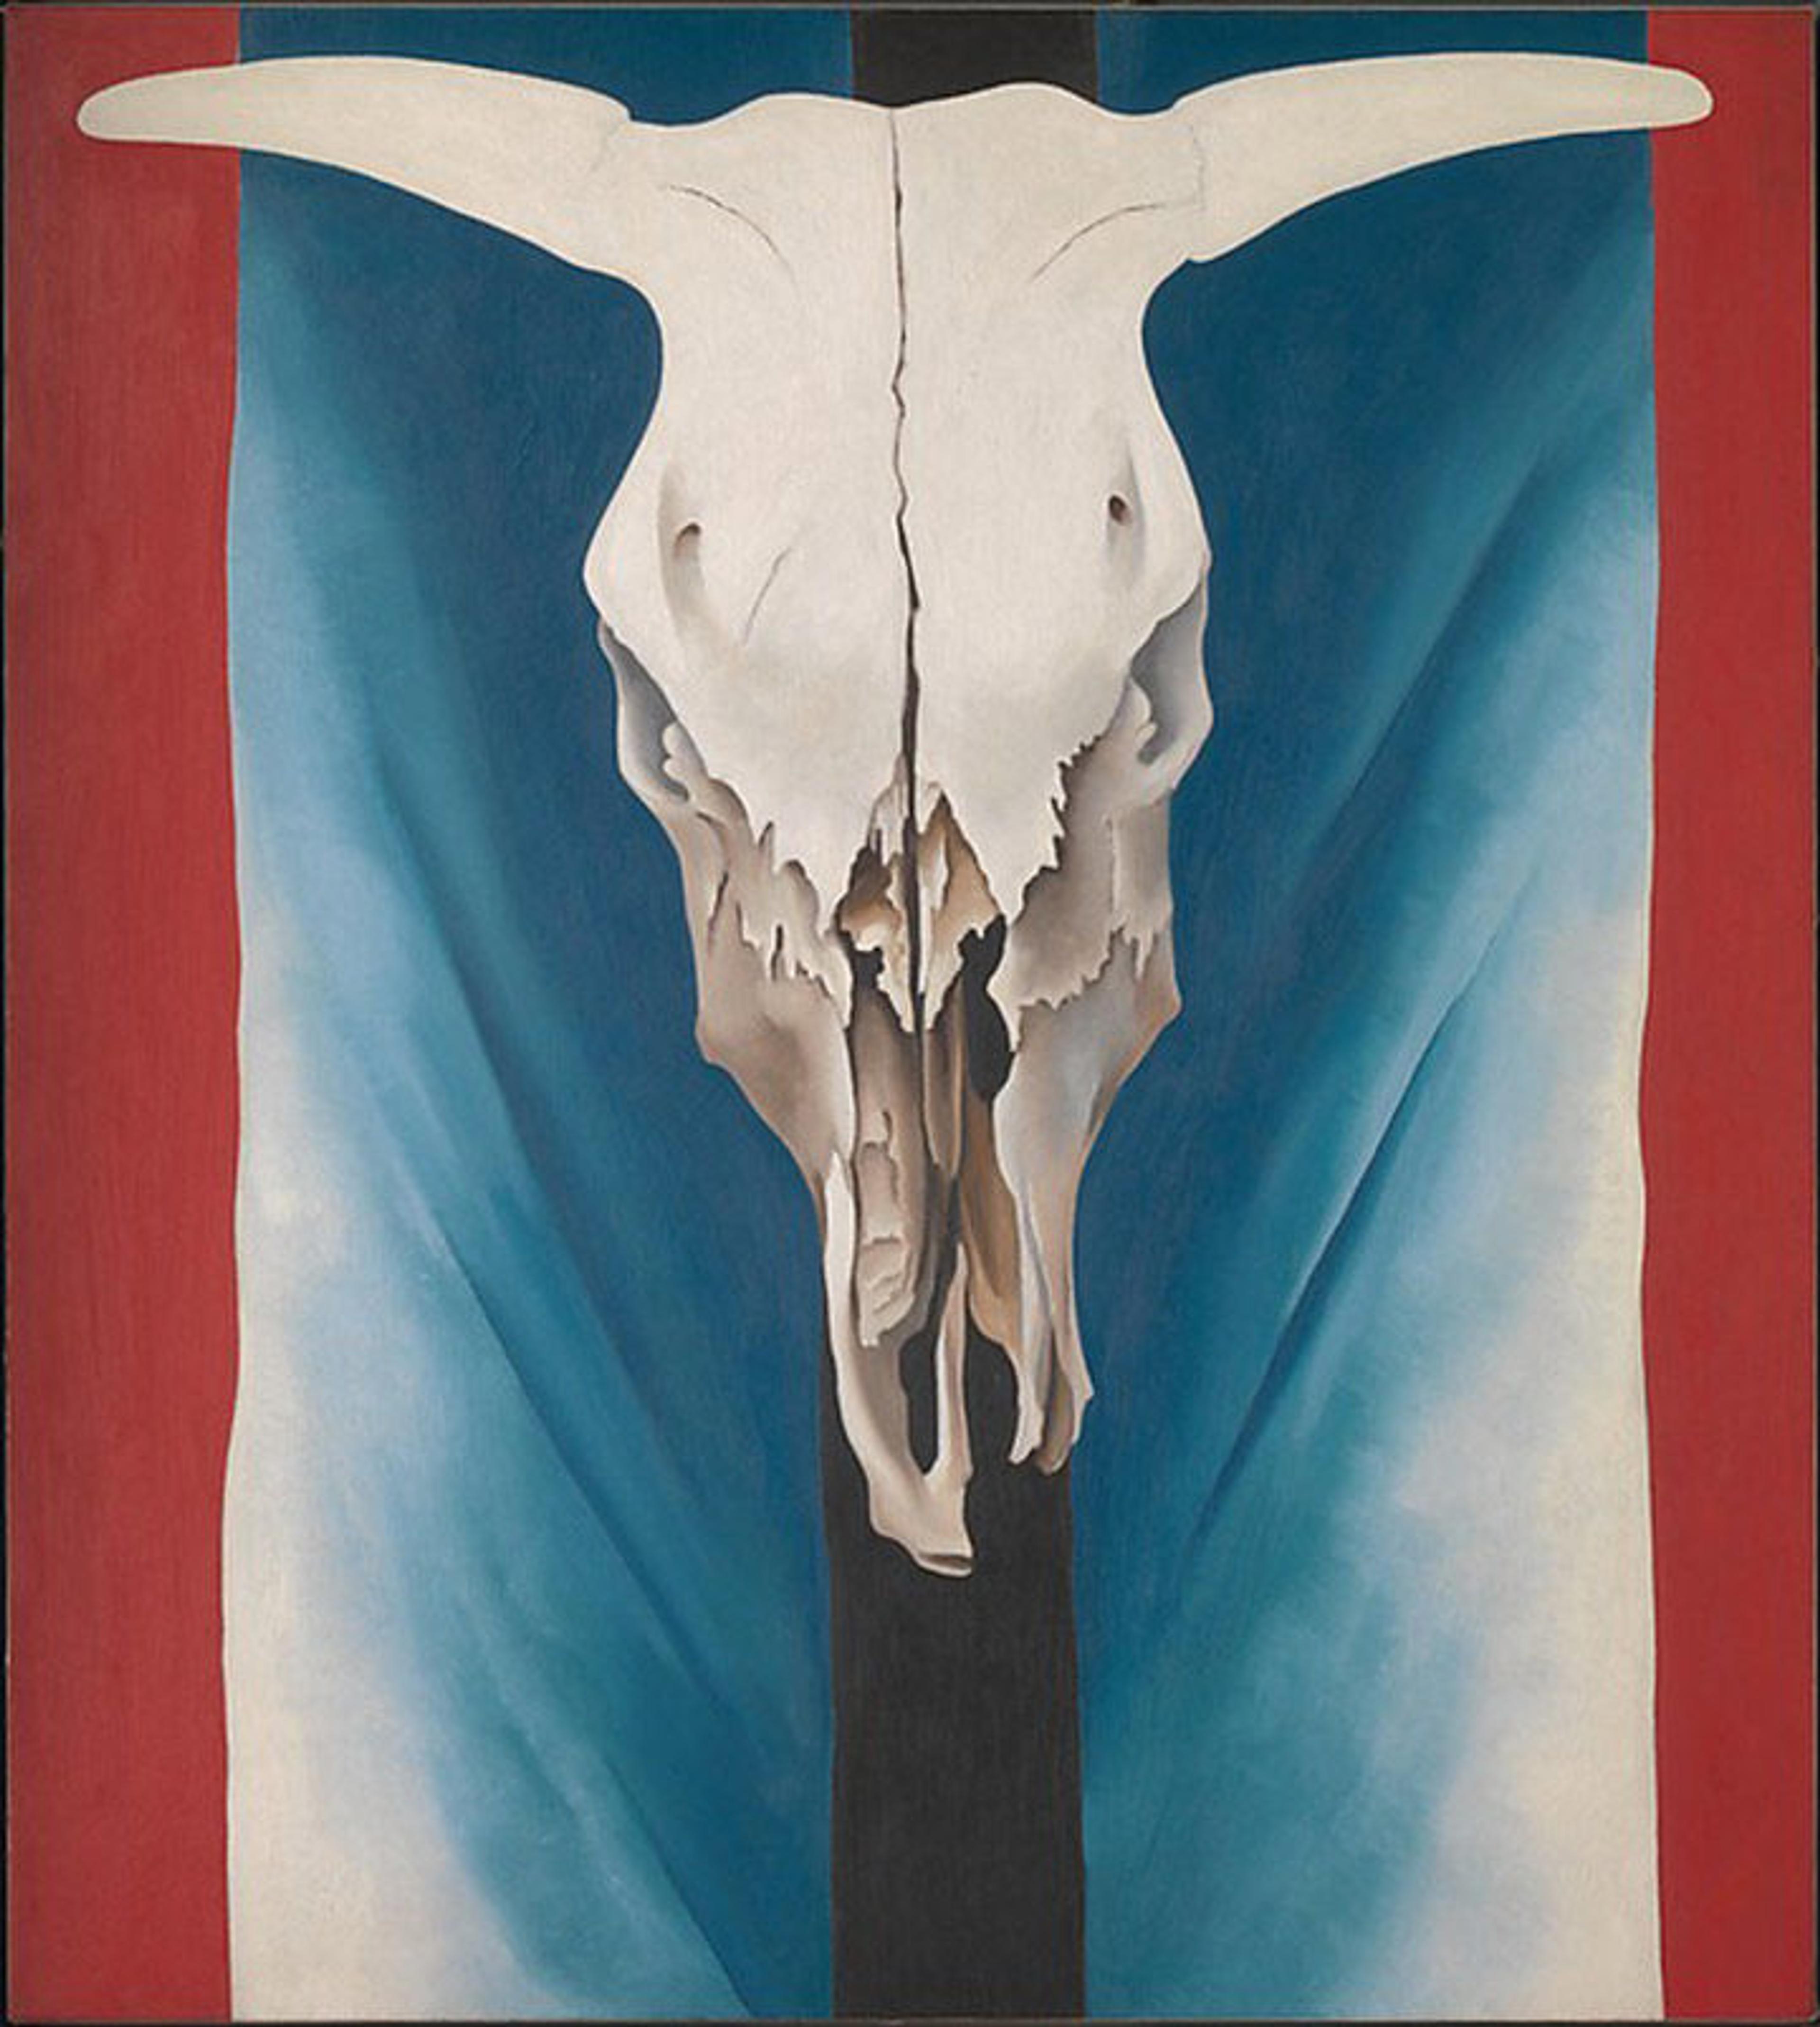 Georgia O'Keeffe, Cow's Skull: Red, White, and Blue